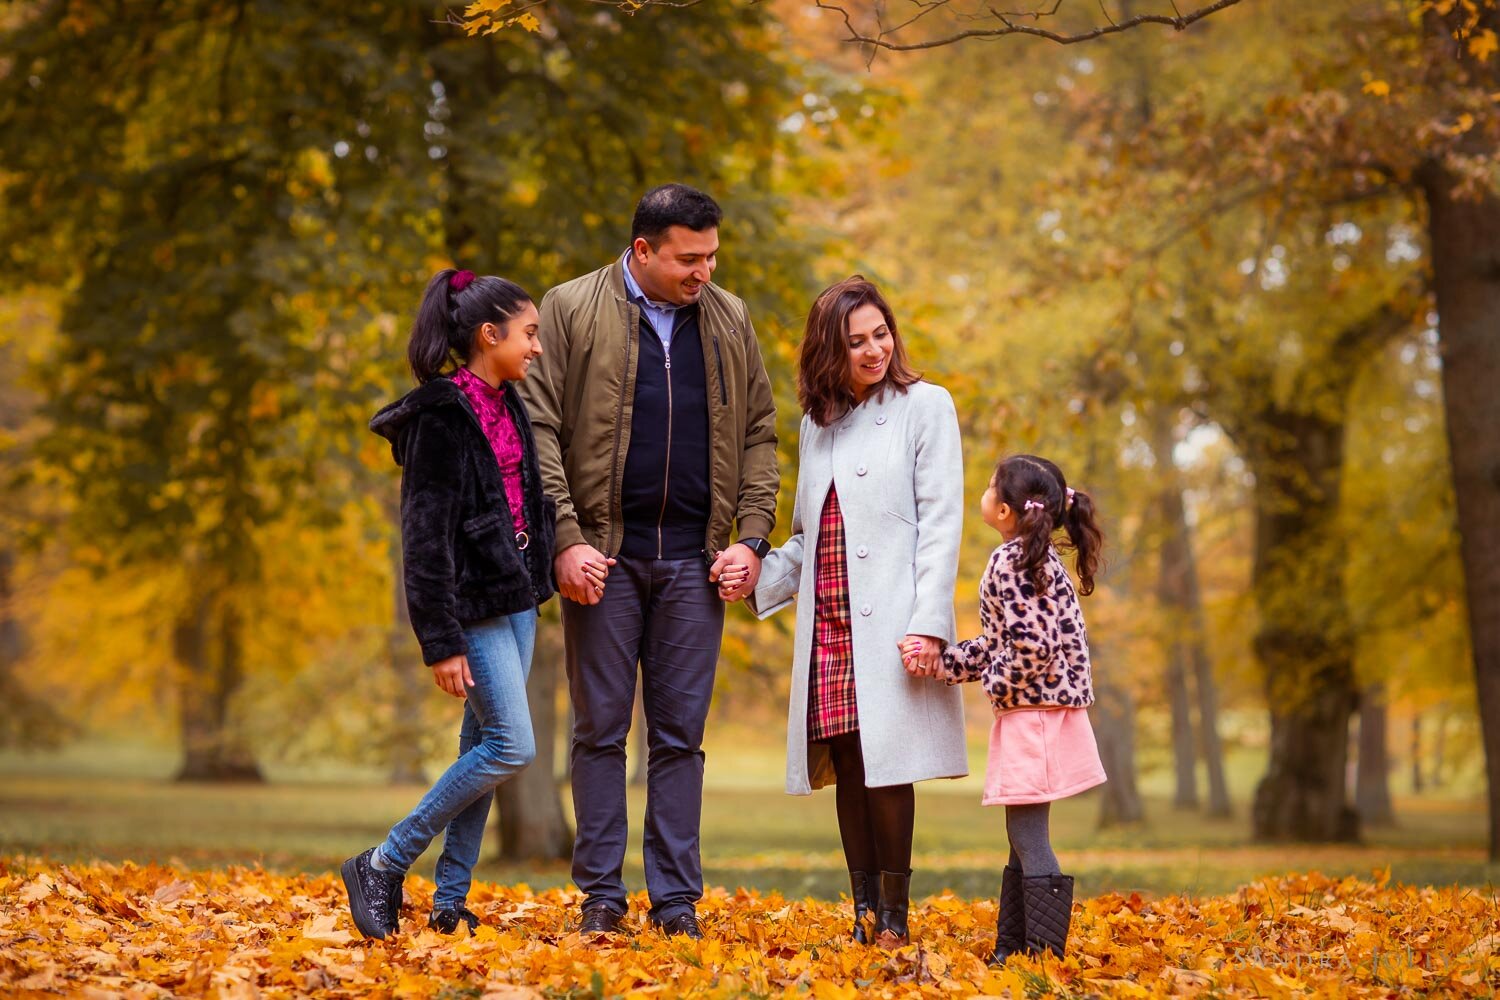 autumn-family-photo-session-at-Ulriksdals-Slott-by-sandra-jolly-photography.jpg